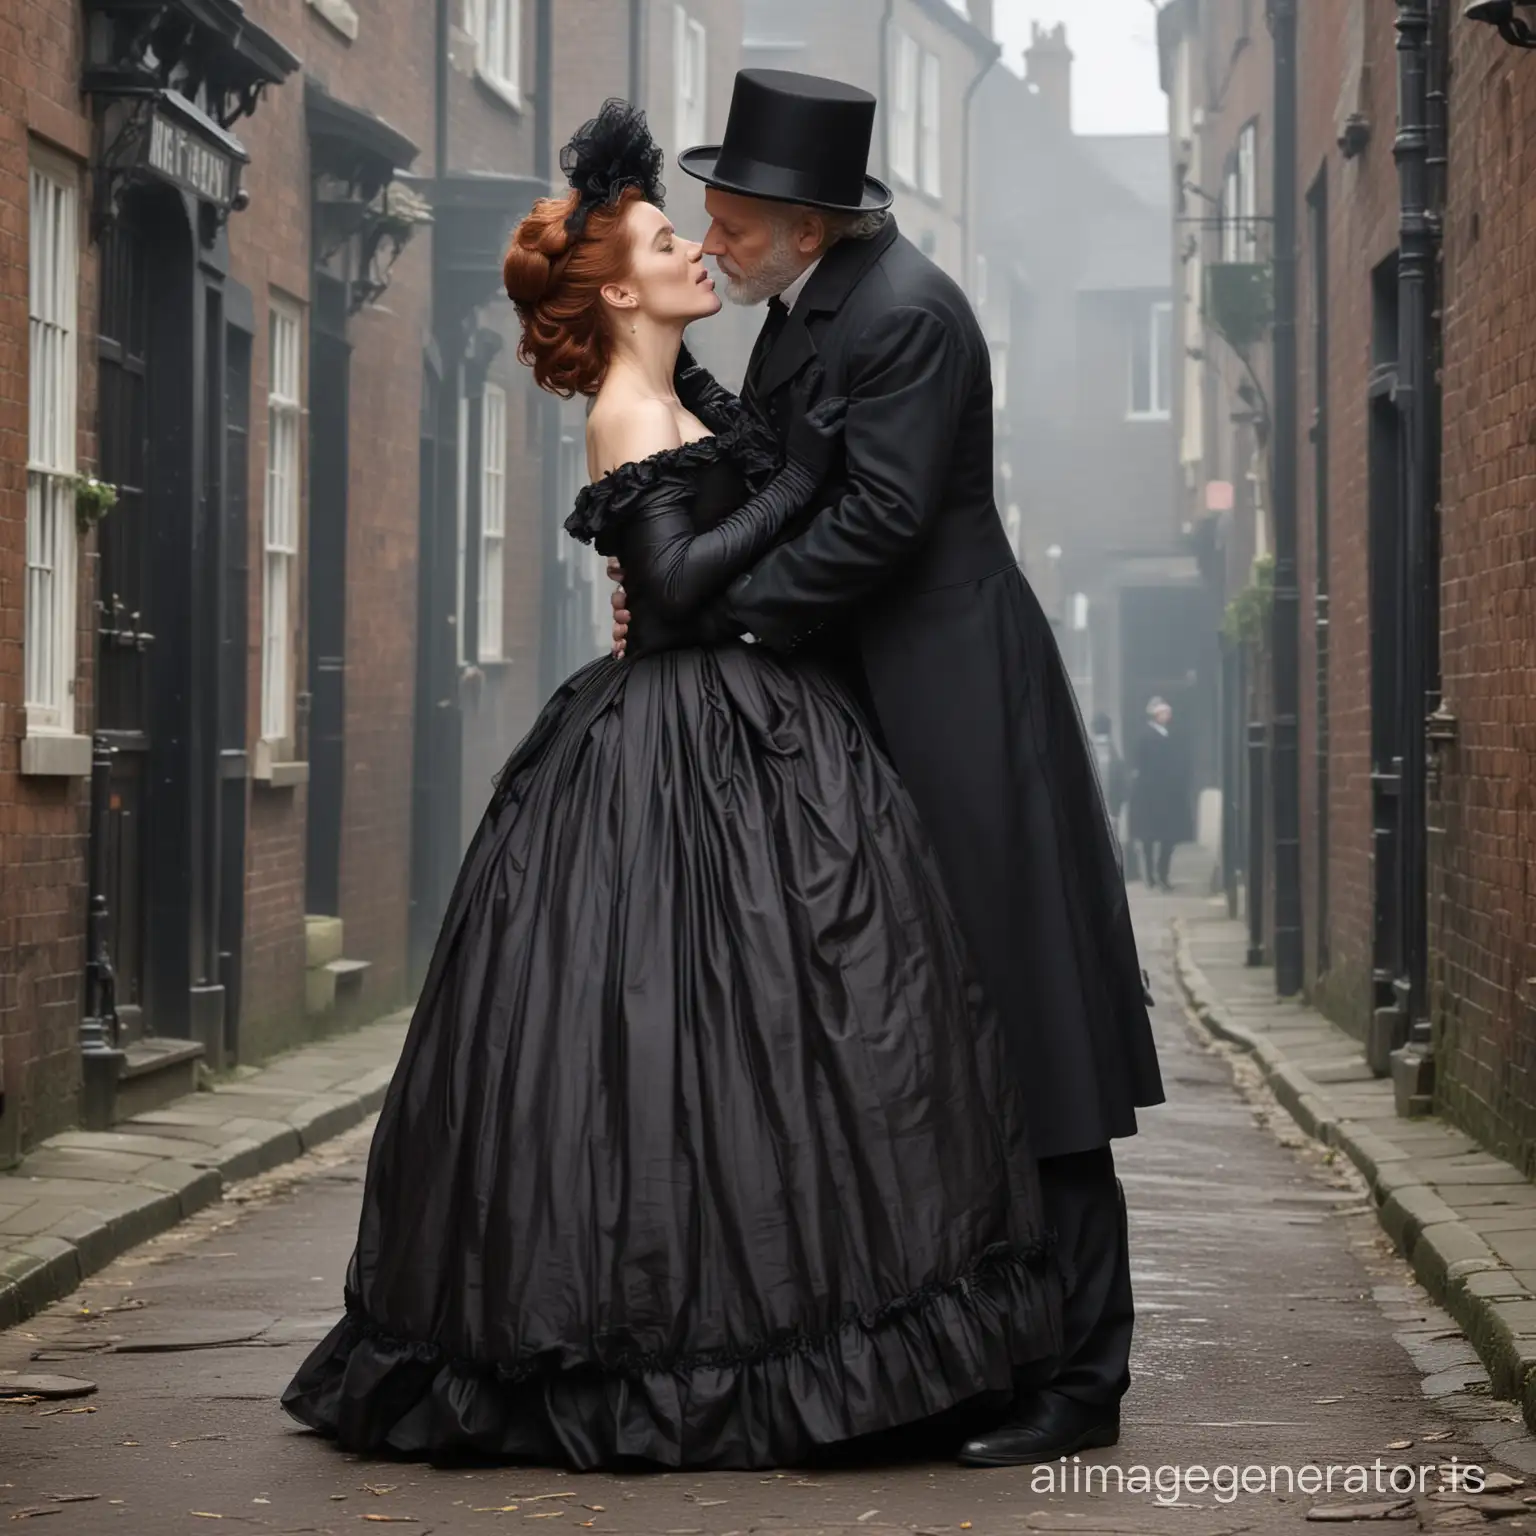 Victorian-Romance-RedHaired-Gillian-Anderson-Embracing-Her-Husband-on-Historic-Street